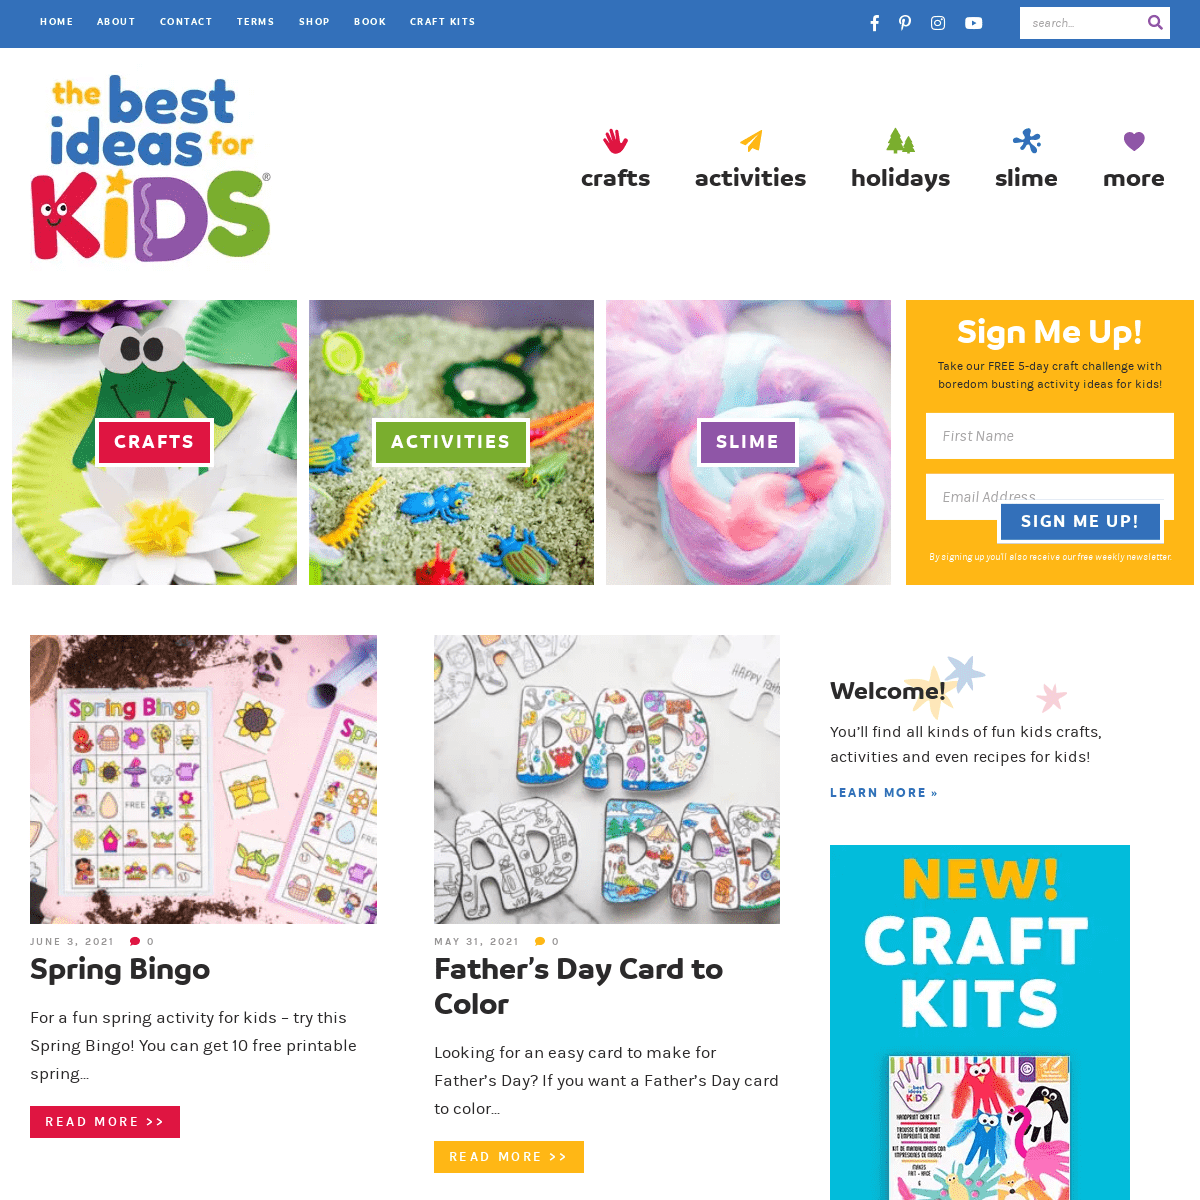 A complete backup of https://thebestideasforkids.com